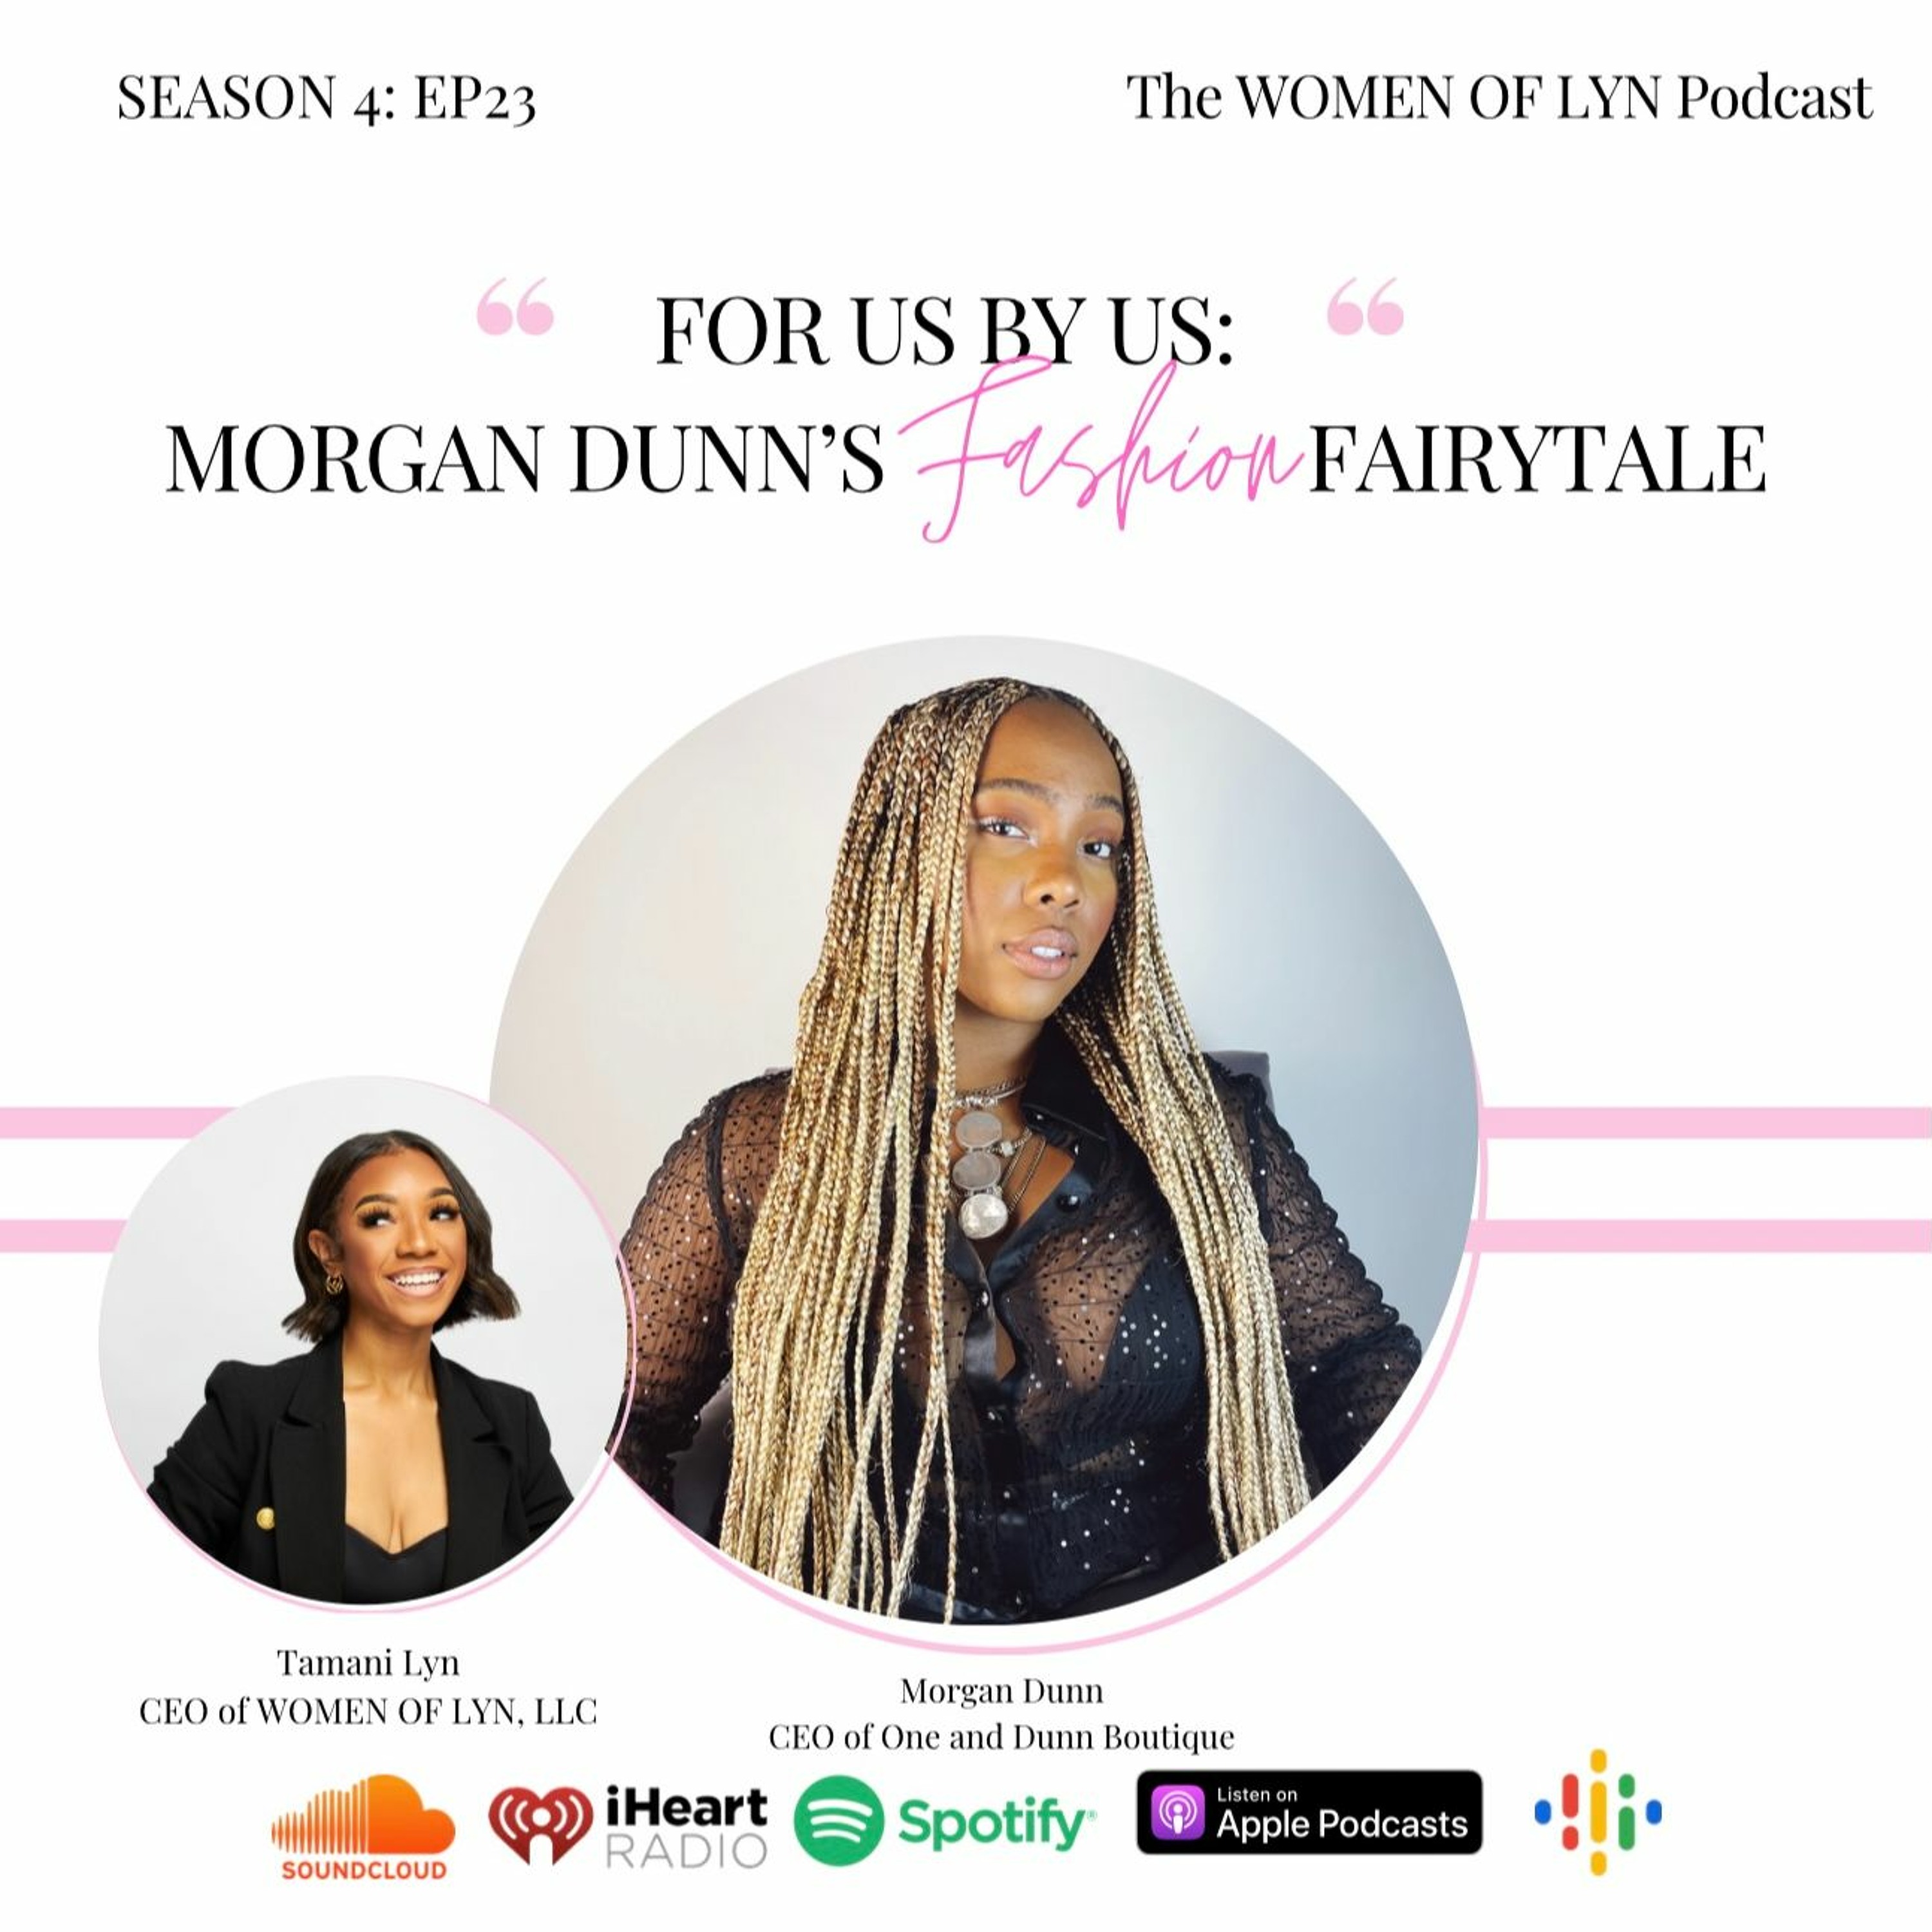 Episode 23: ”For Us, By Us; Morgan Dunn’s Fashion Fairytale”